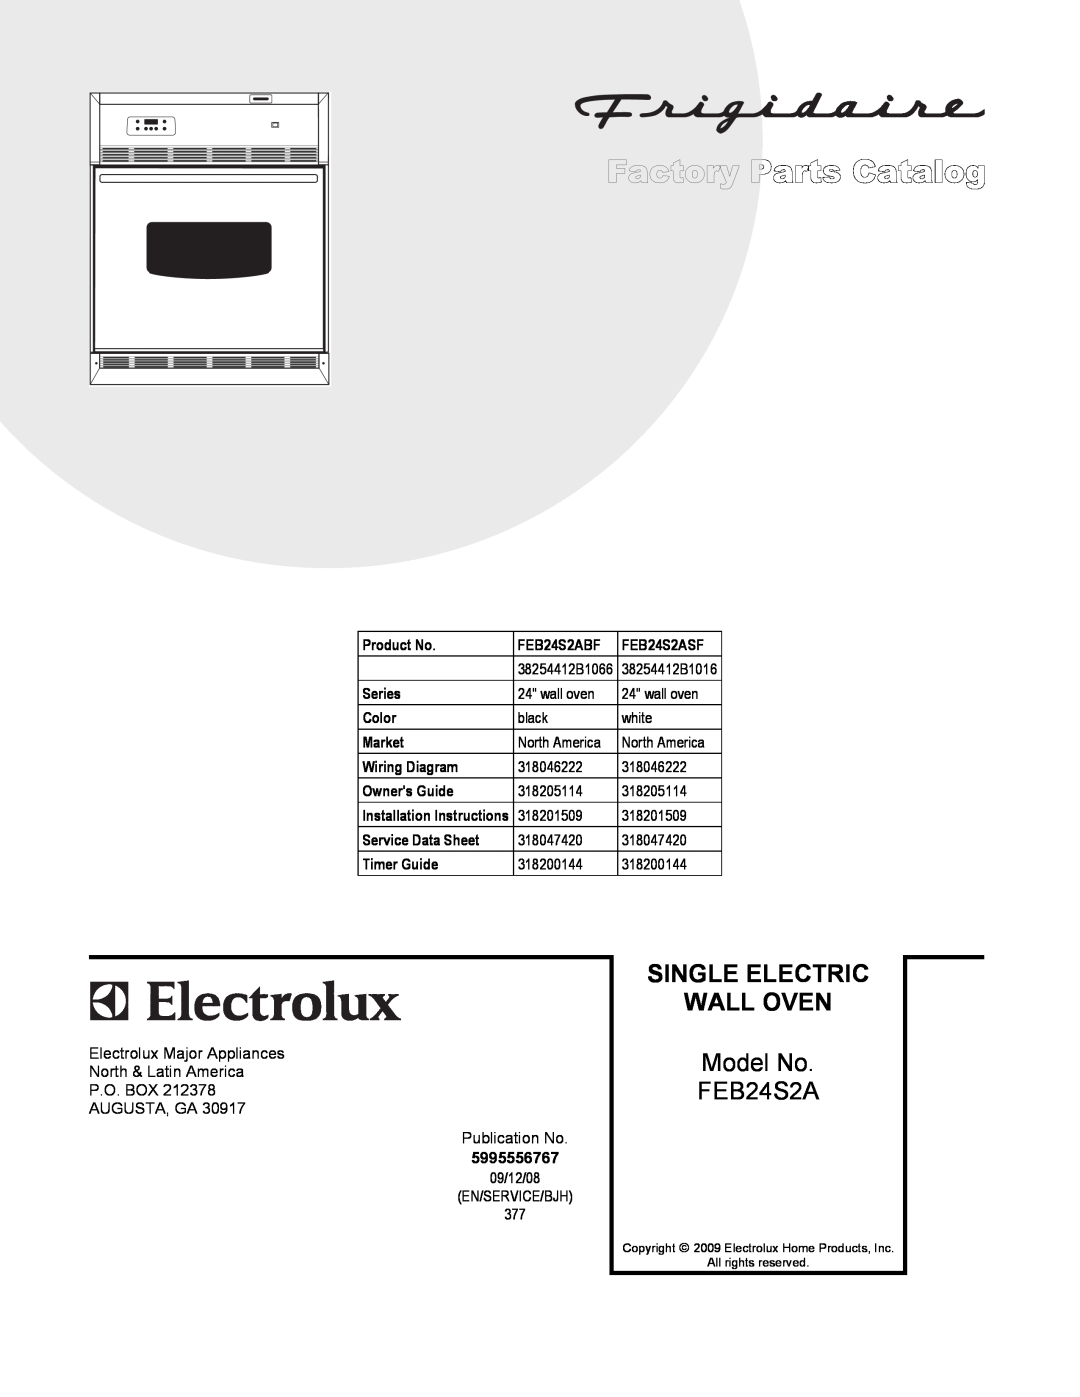 Electrolux installation instructions Single Electric Wall Oven, Model No FEB24S2A 